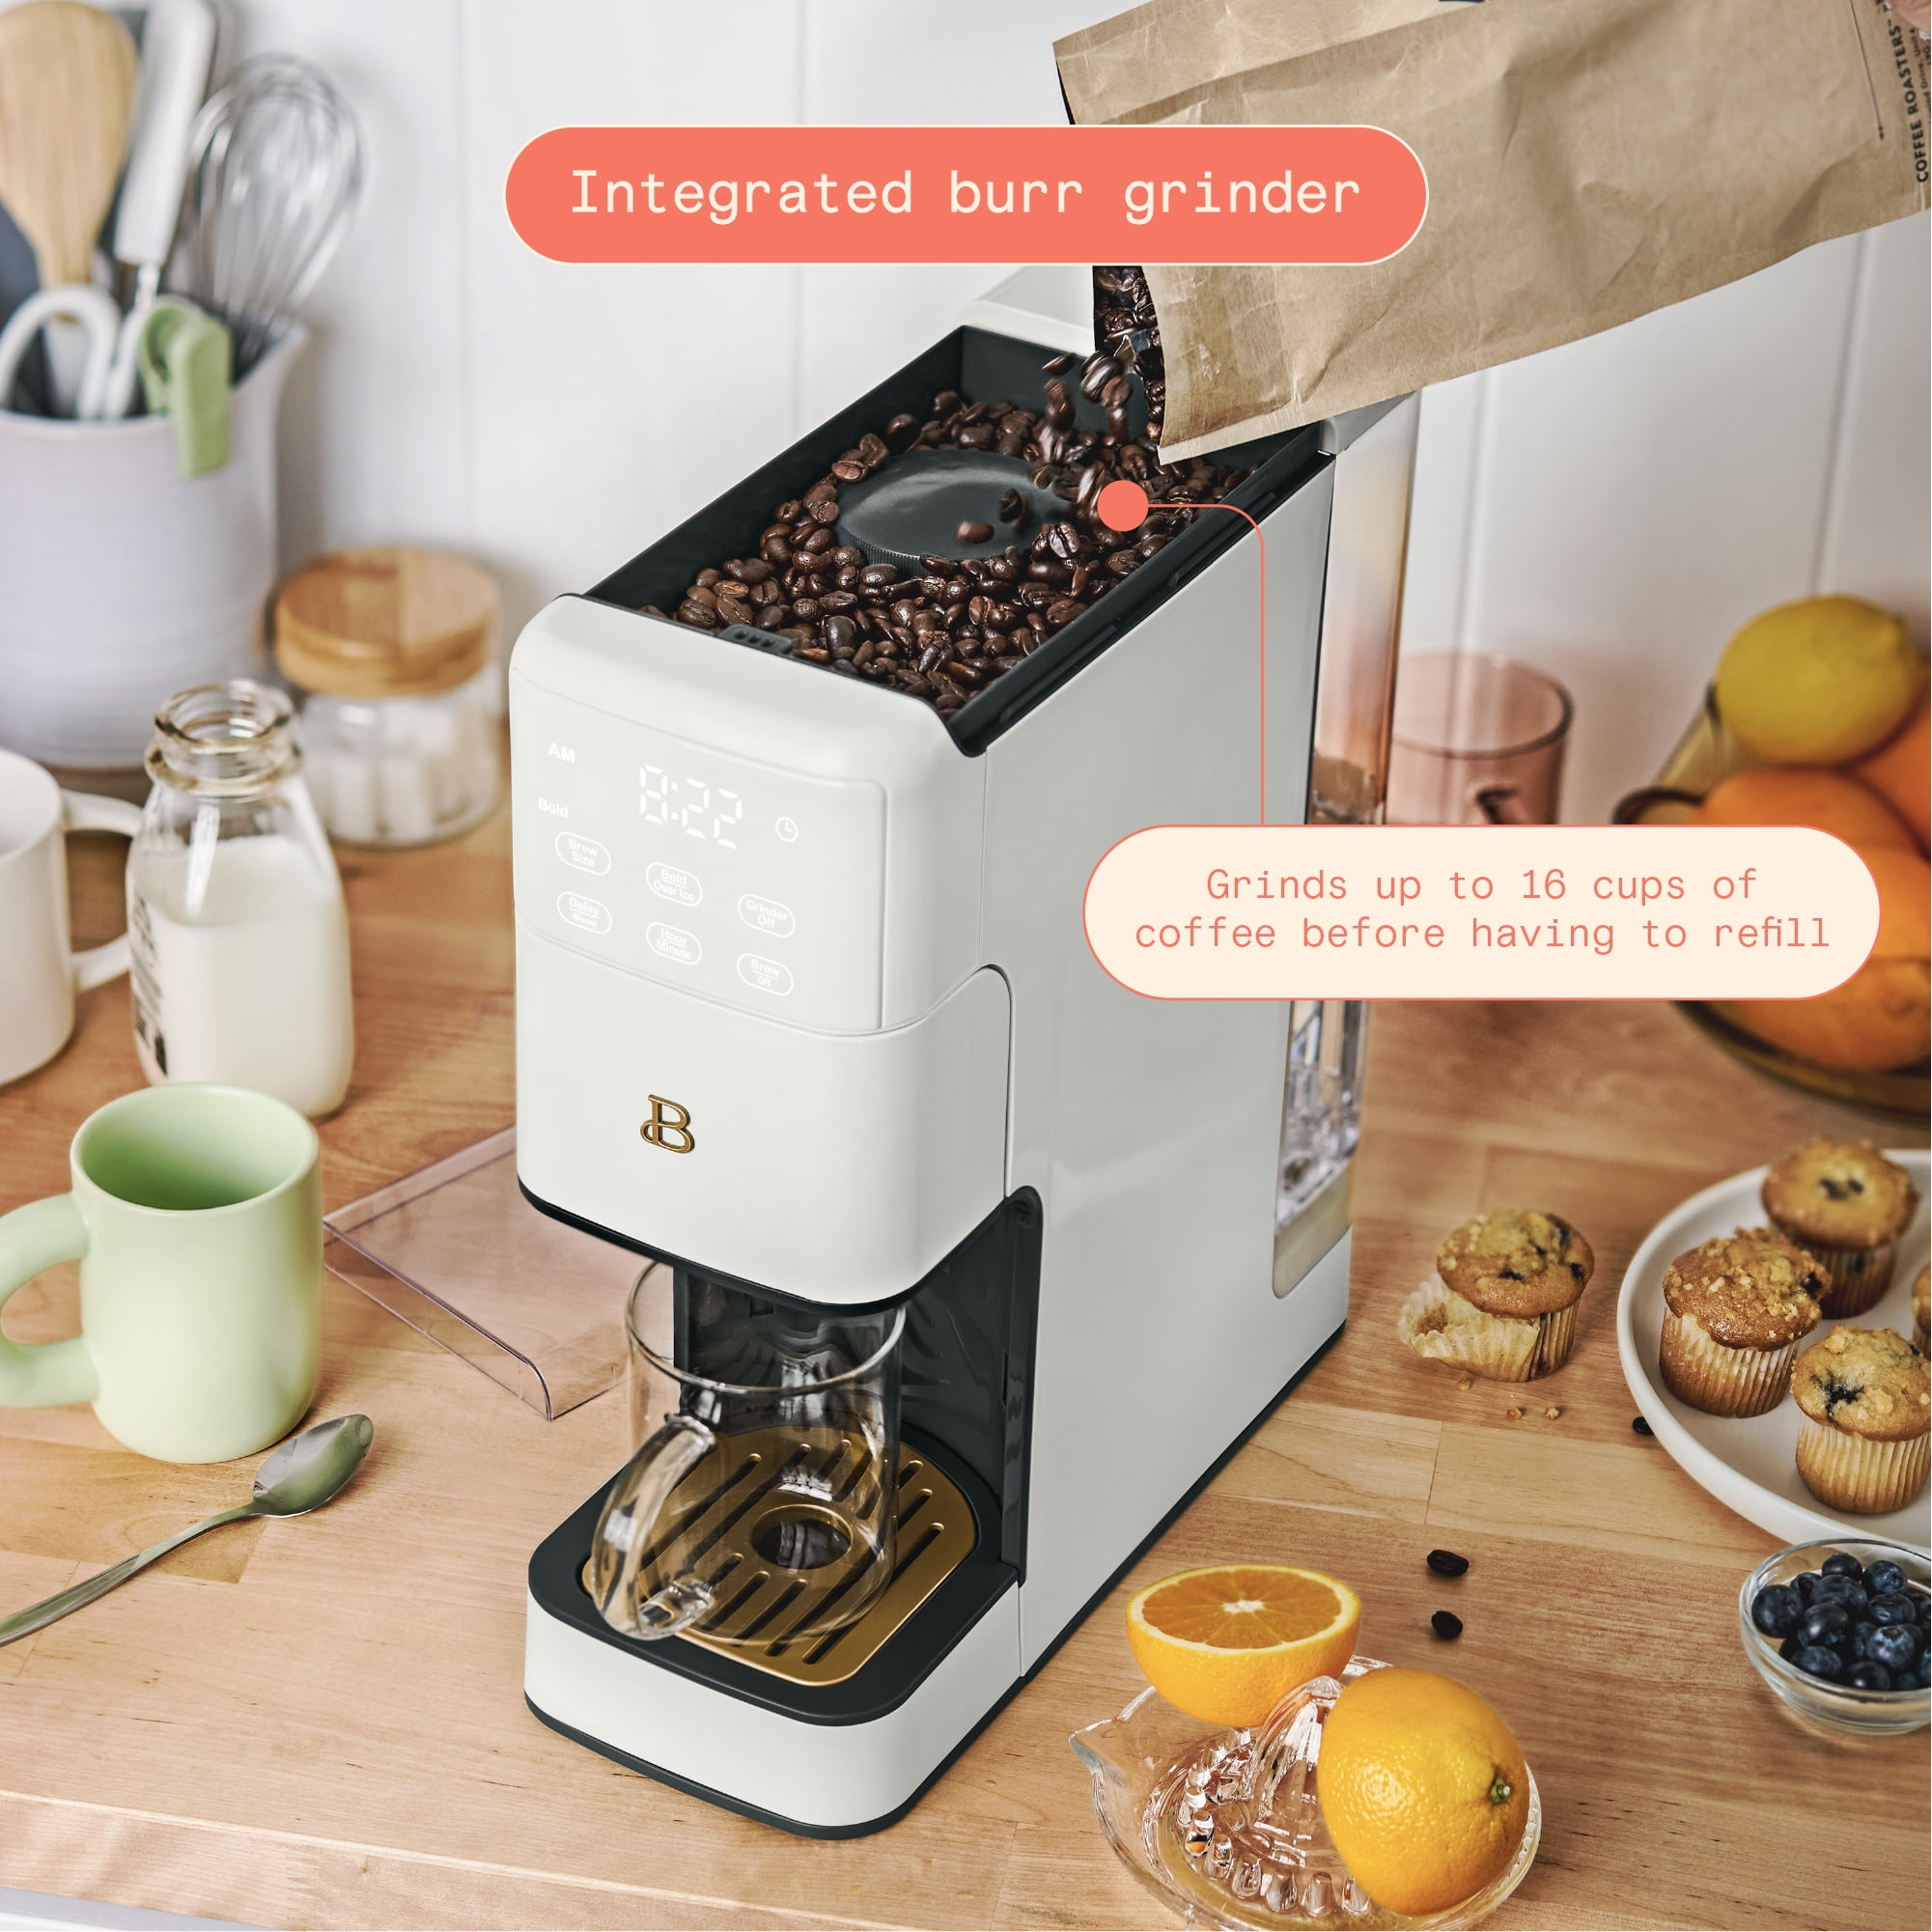  Beautiful By Drew Barrymore 12-Cup Programmable Coffee Maker  with Single-Serve Function and Iced Coffee Brewing, White: Home & Kitchen